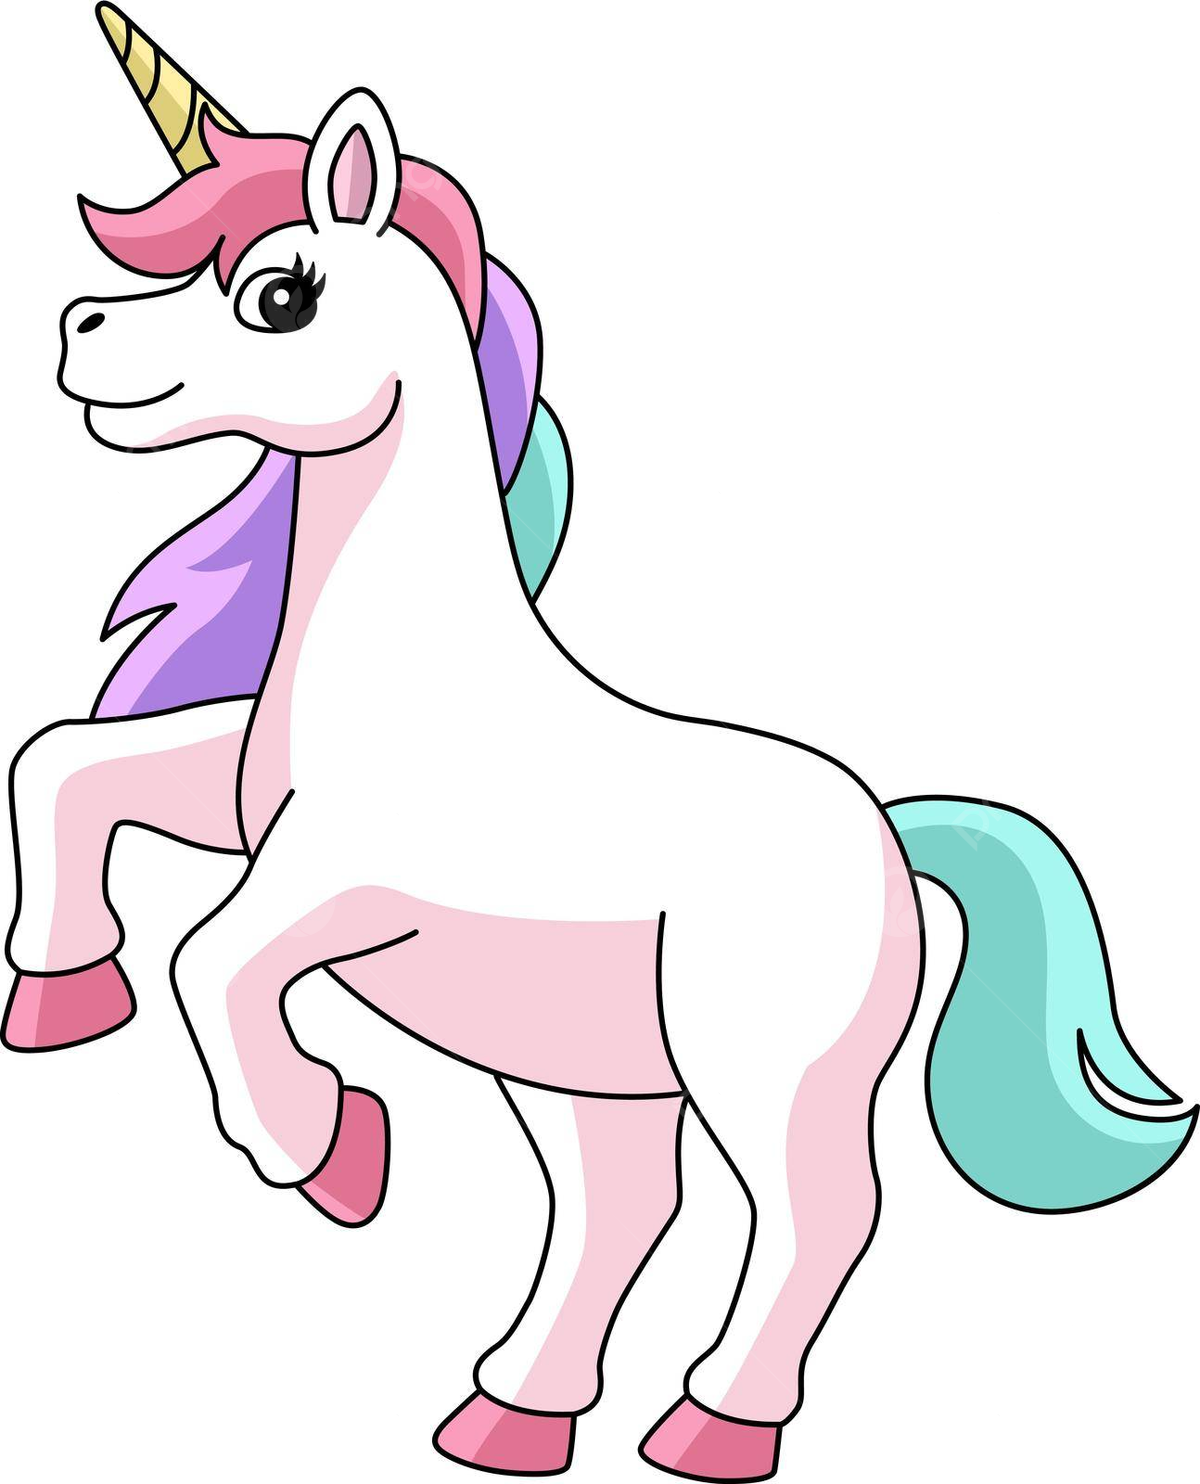 Unicorn in candy land cartoon clipart colorful hand drawn pony vector colorful hand drawn pony png and vector with transparent background for free download